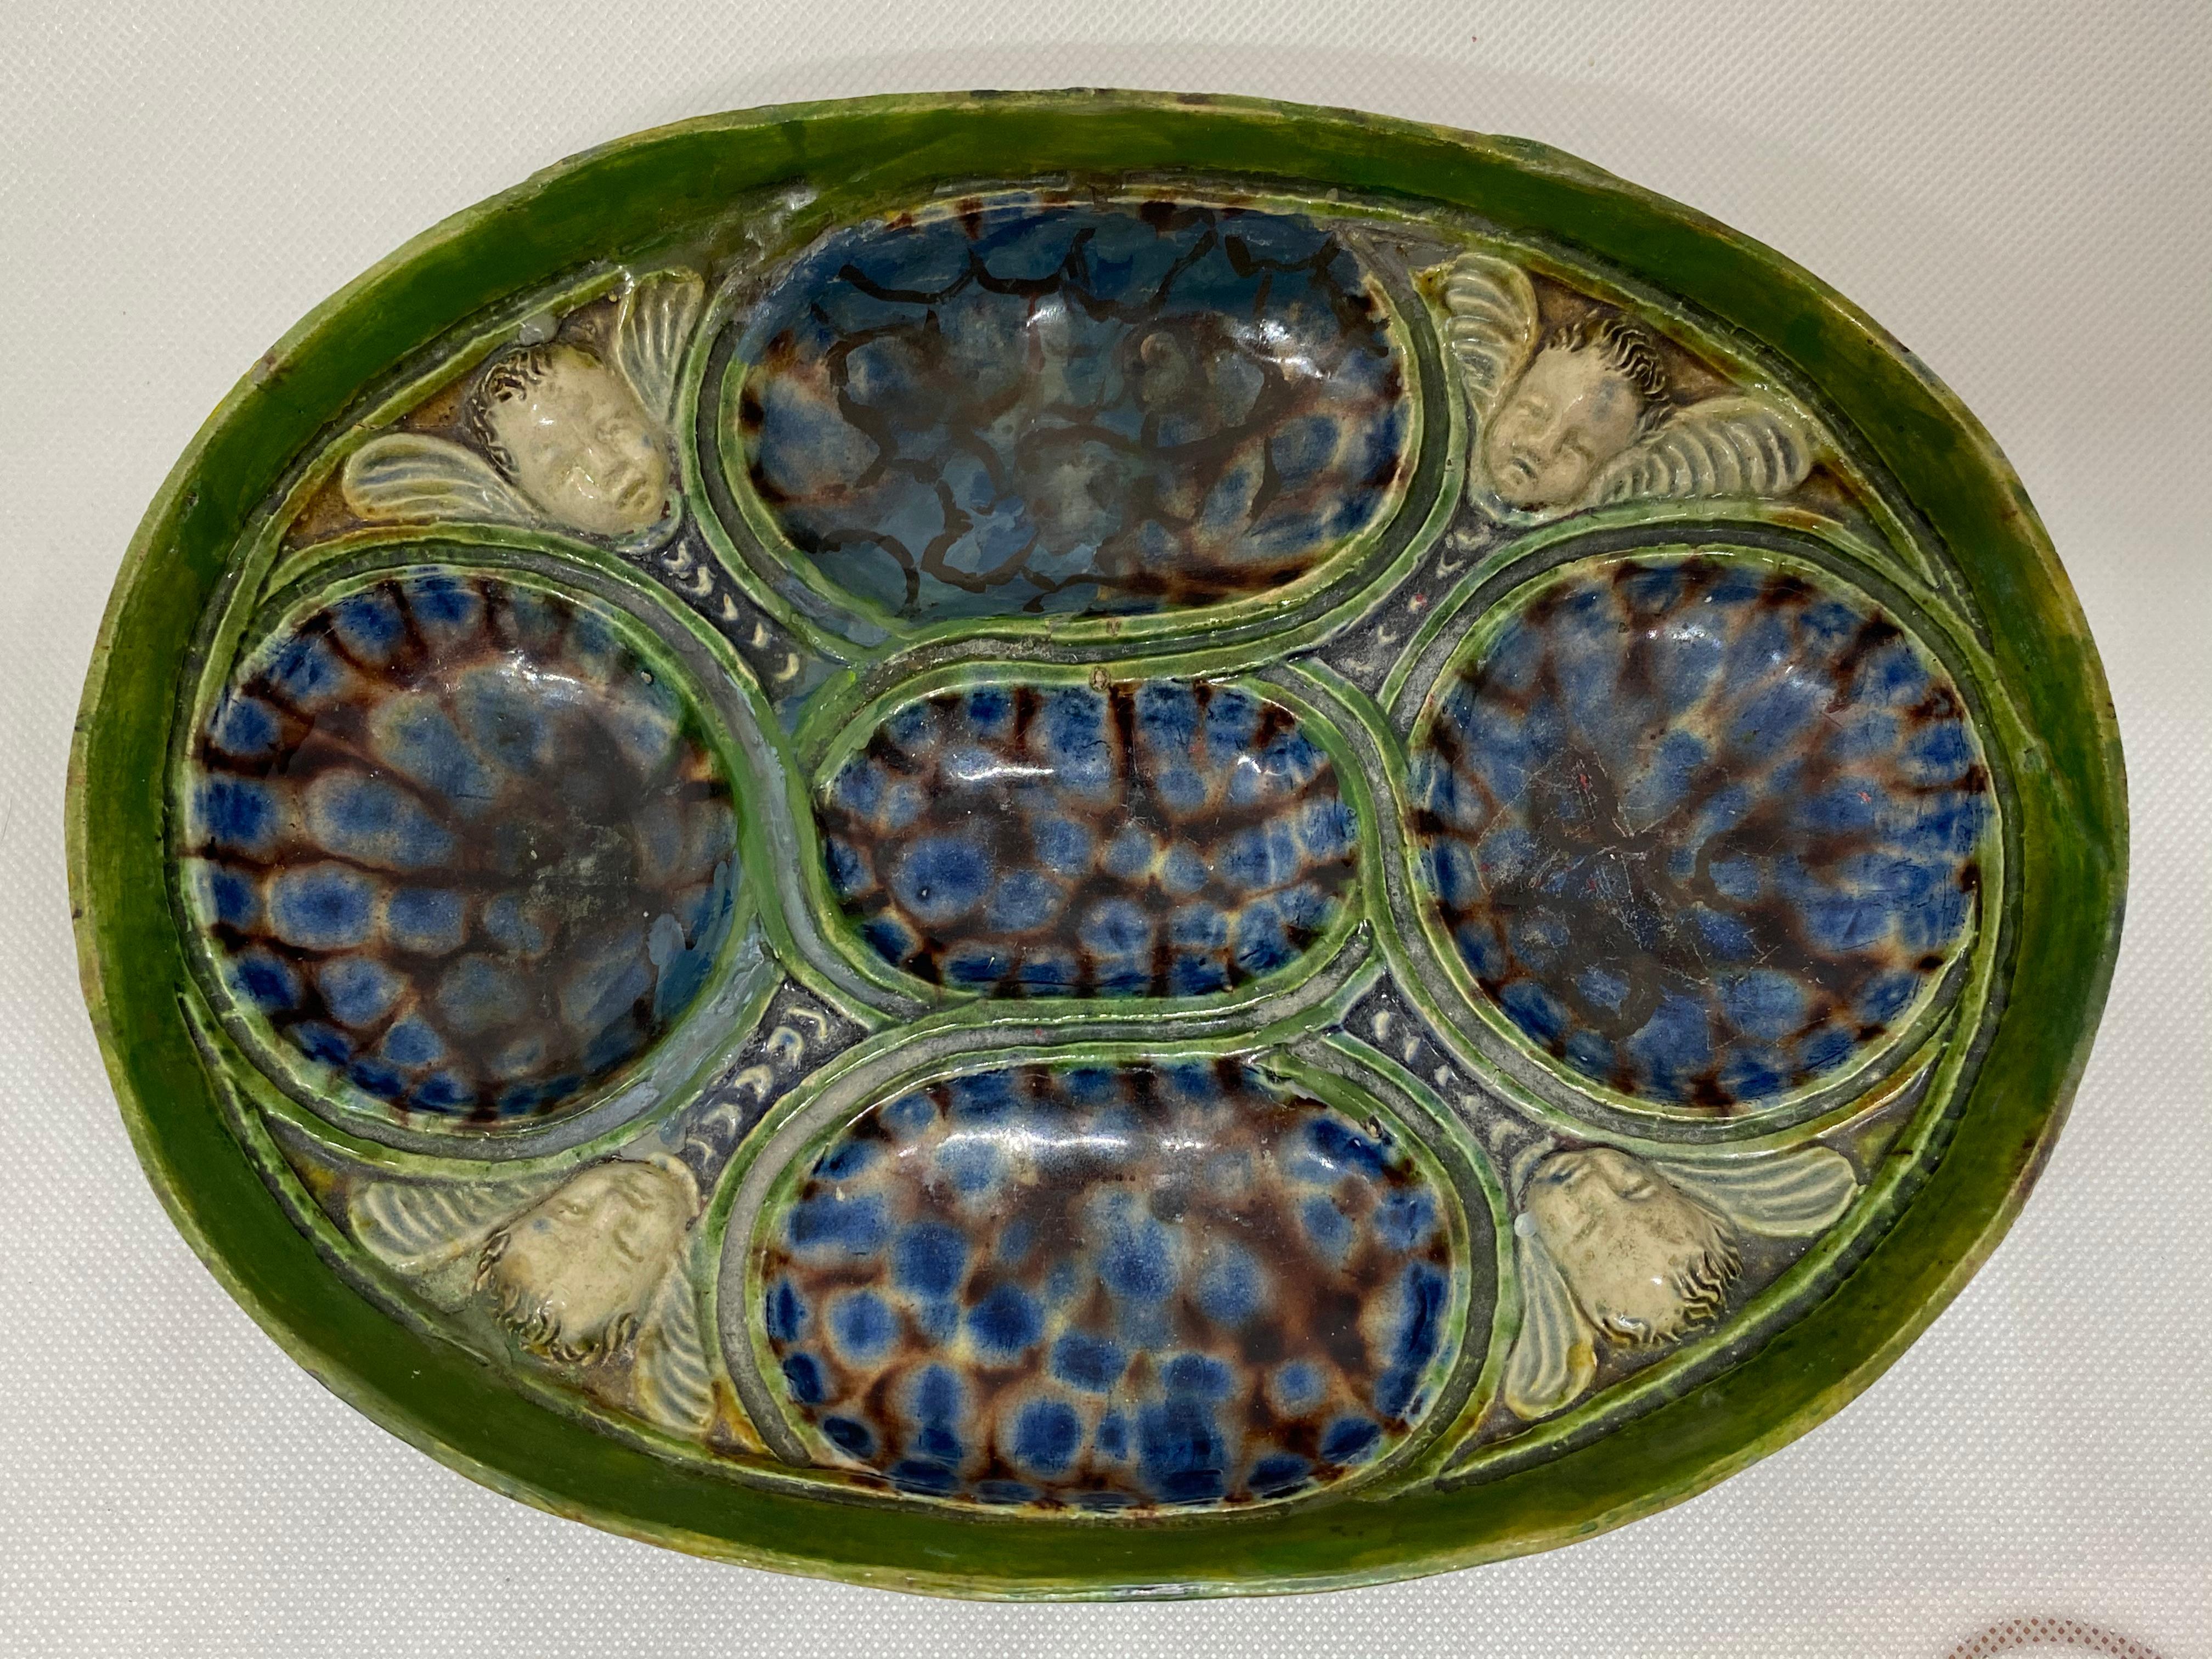 Glazed Oval Dish with Winged Putti, After Bernard Palissy, French, 17th Century For Sale